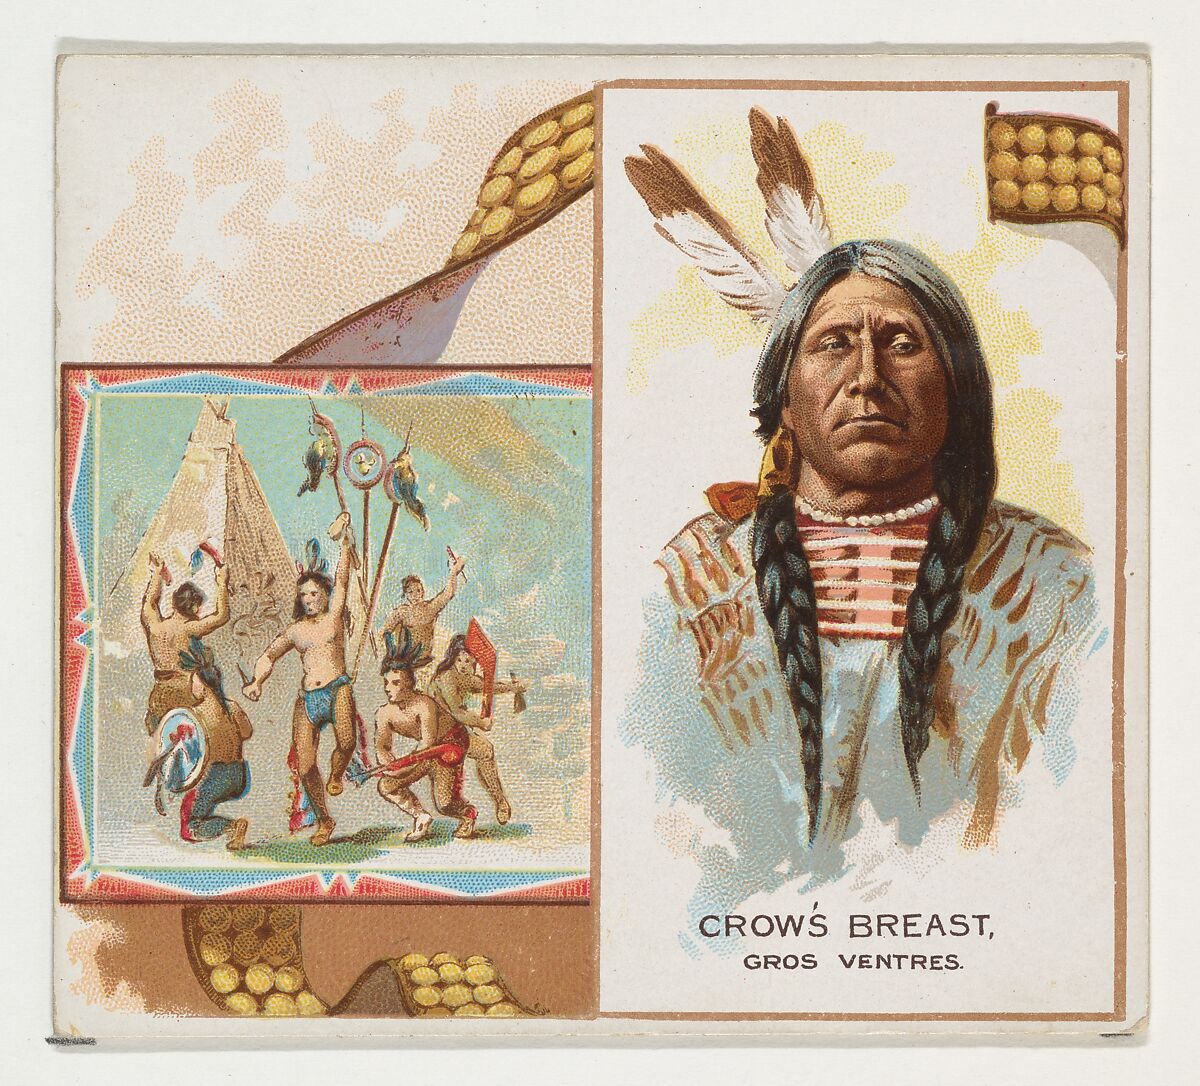 Crow's Breast, Gros Ventres, from the American Indian Chiefs series (N36) for Allen & Ginter Cigarettes, Issued by Allen &amp; Ginter (American, Richmond, Virginia), Commercial color lithograph 